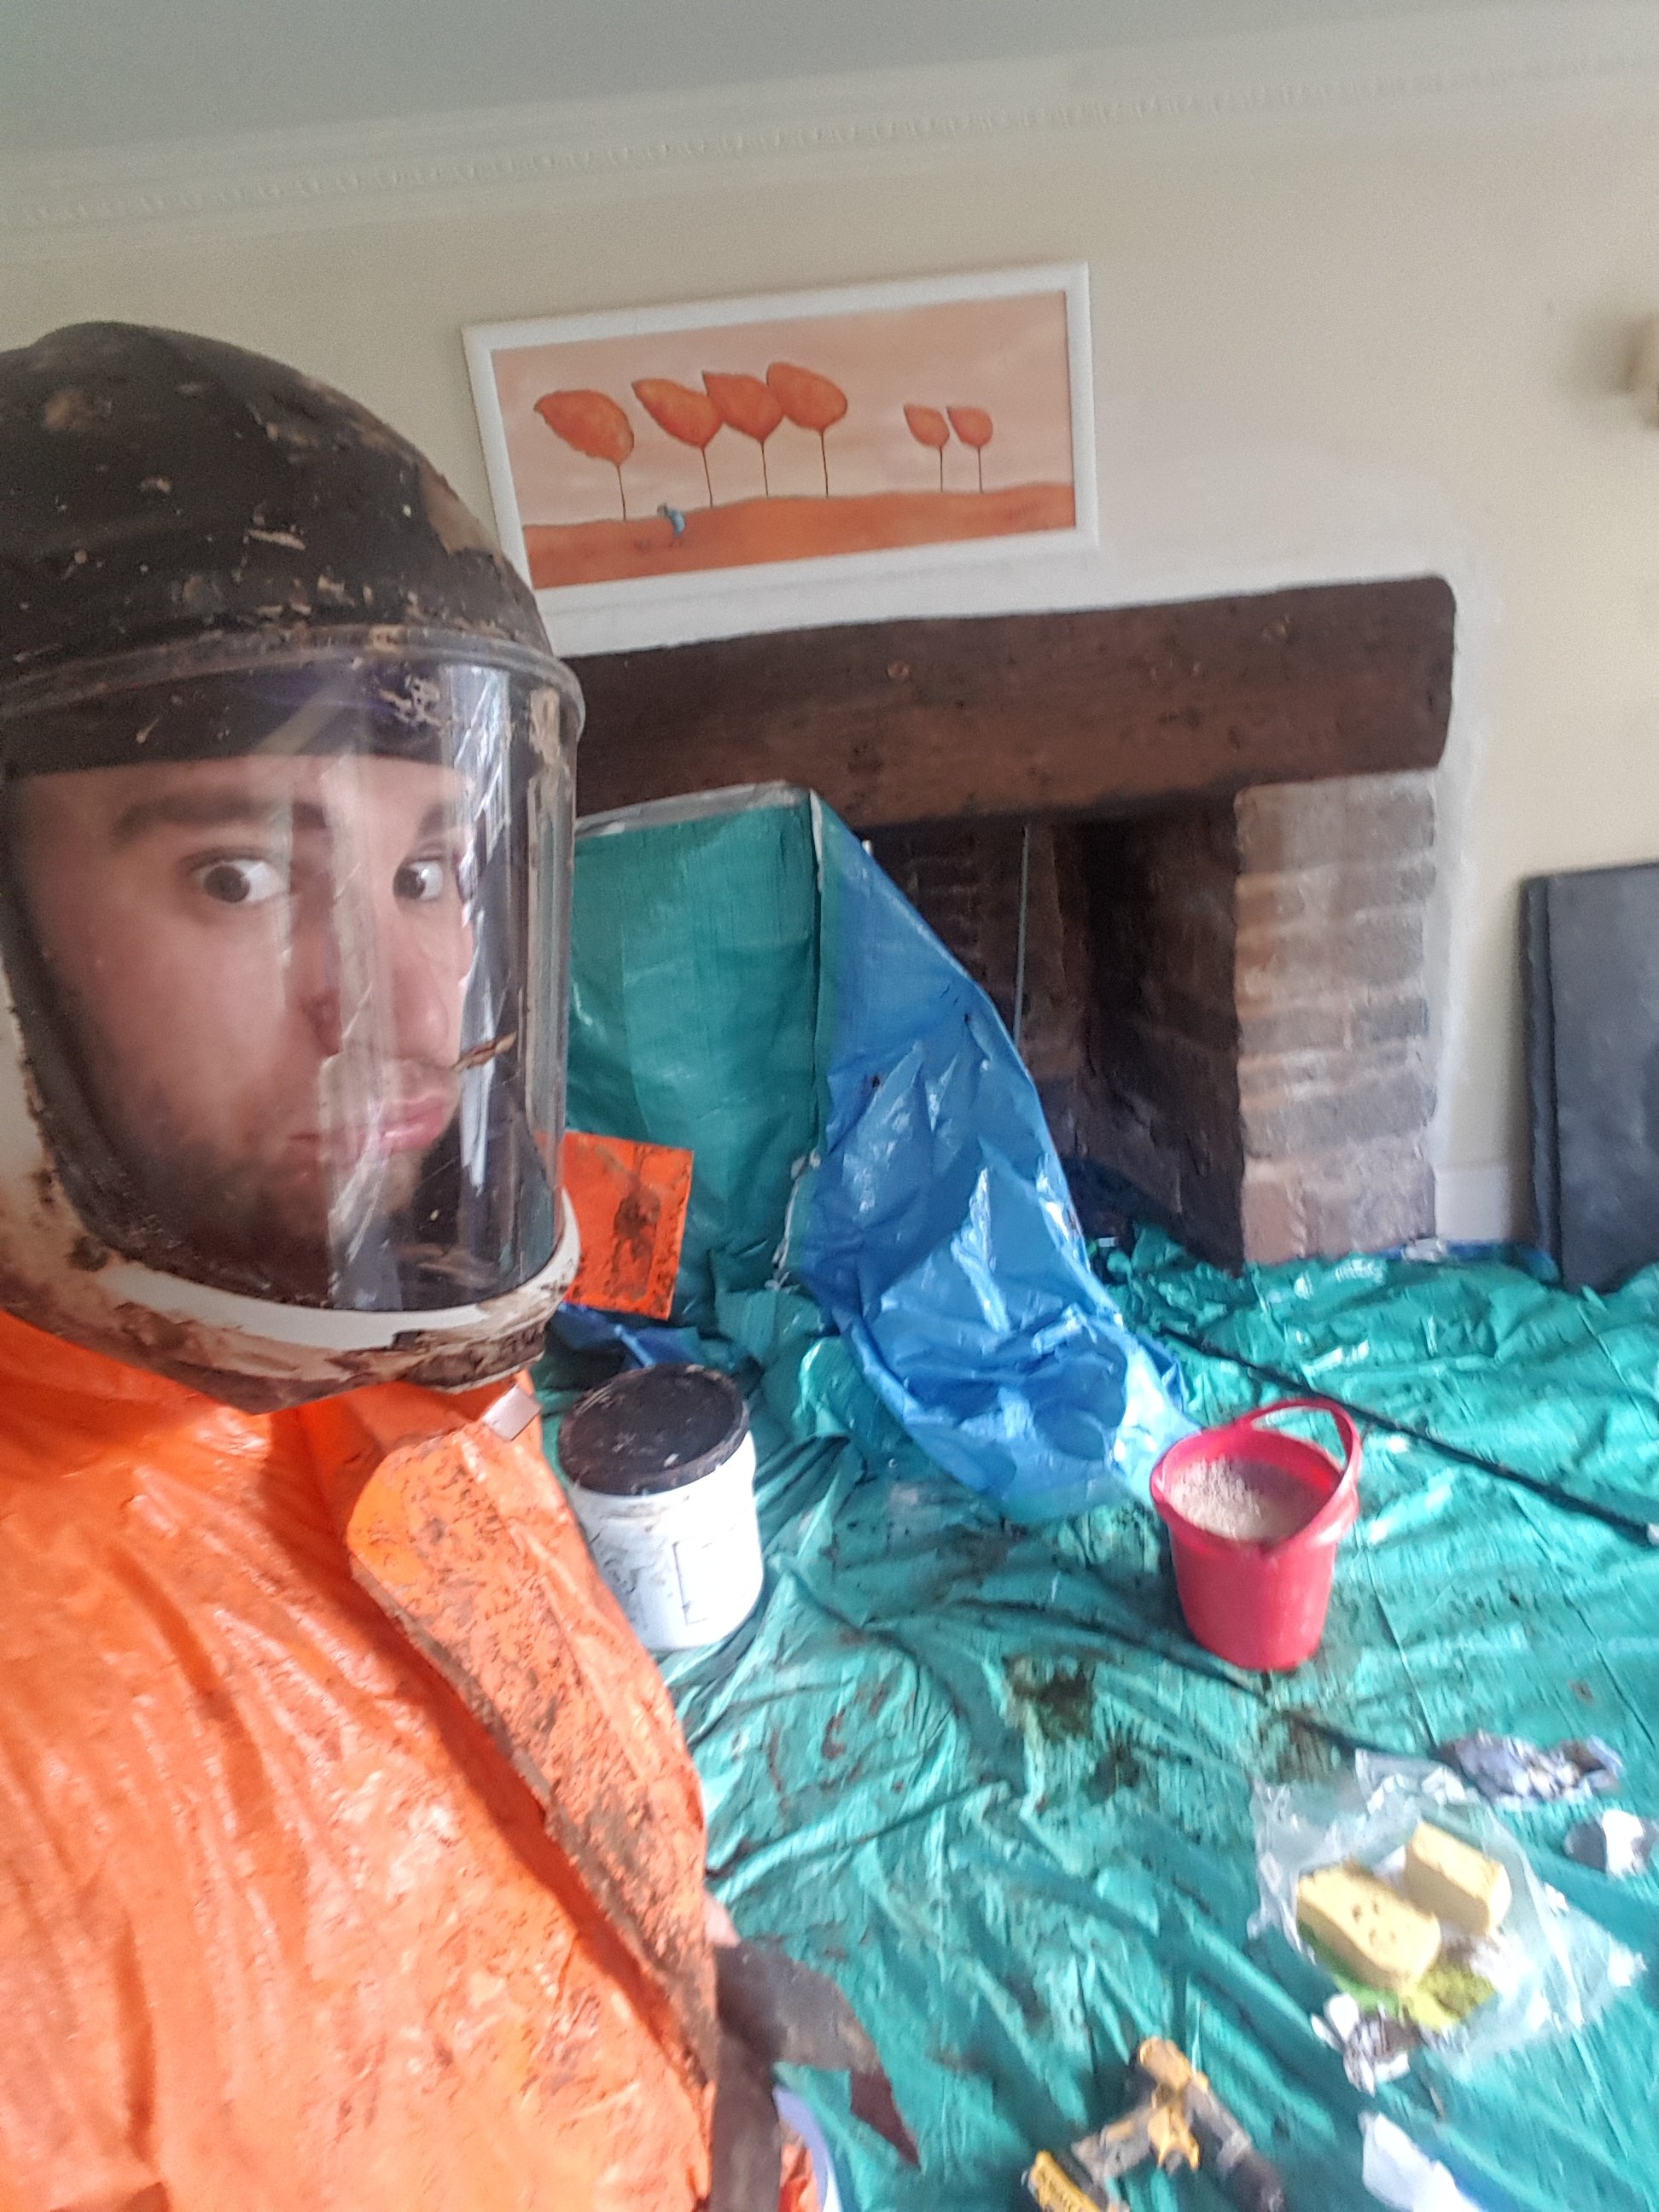 Danny hodgson is a master chimney sweep in devon undertaking a full pcr treatment in crediton, devon. Danny is wearing 3m jupiter mask and hazardous waster suit